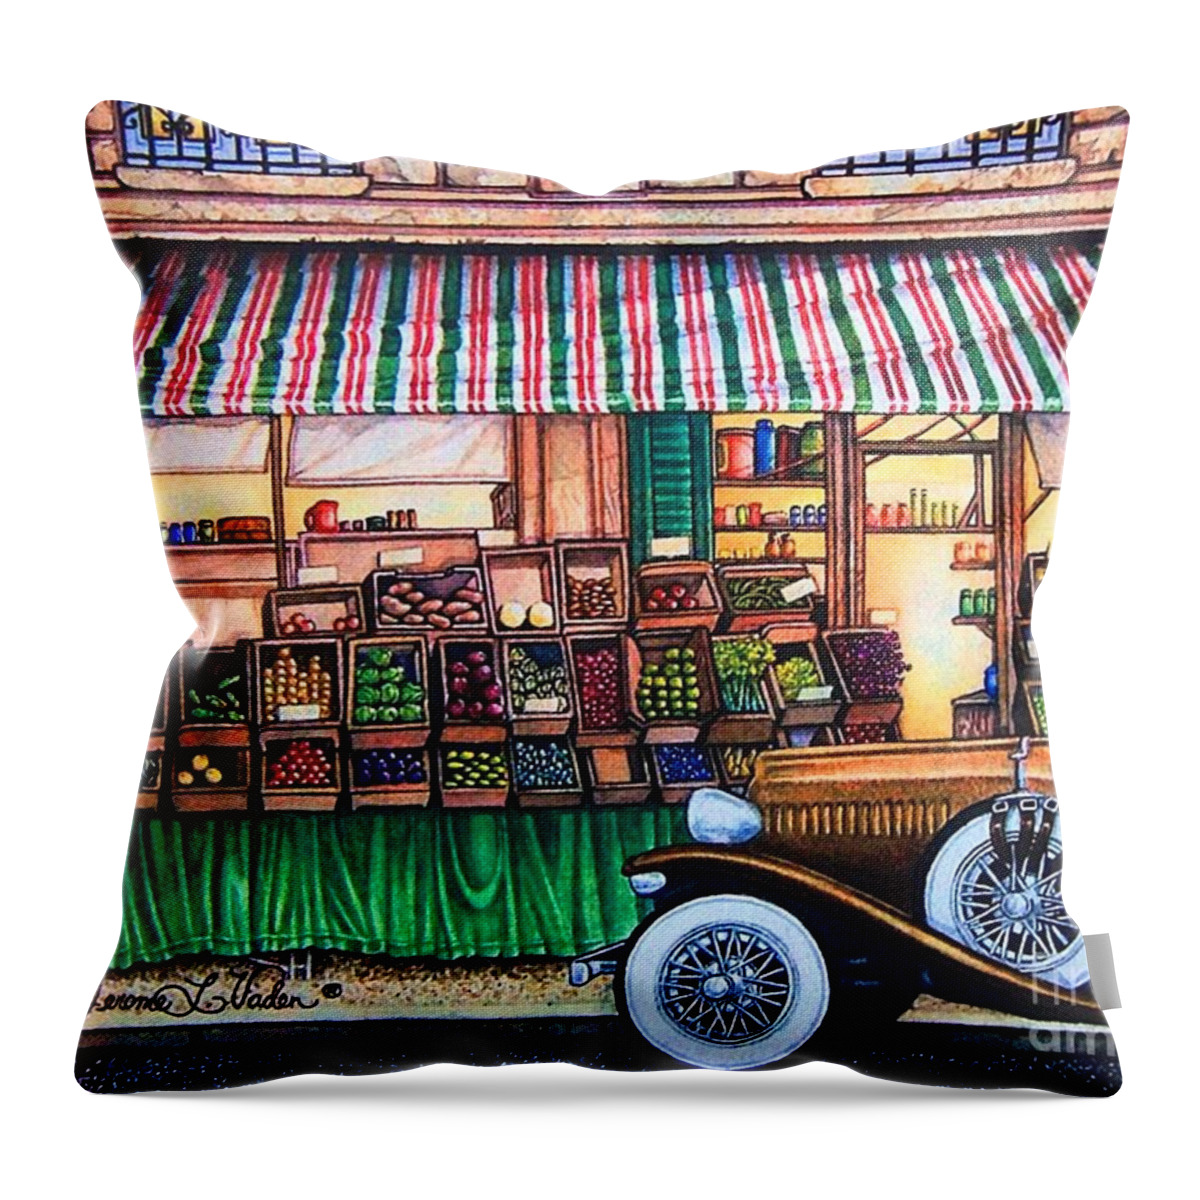  Throw Pillow featuring the painting Paris Street Market by JL Vaden